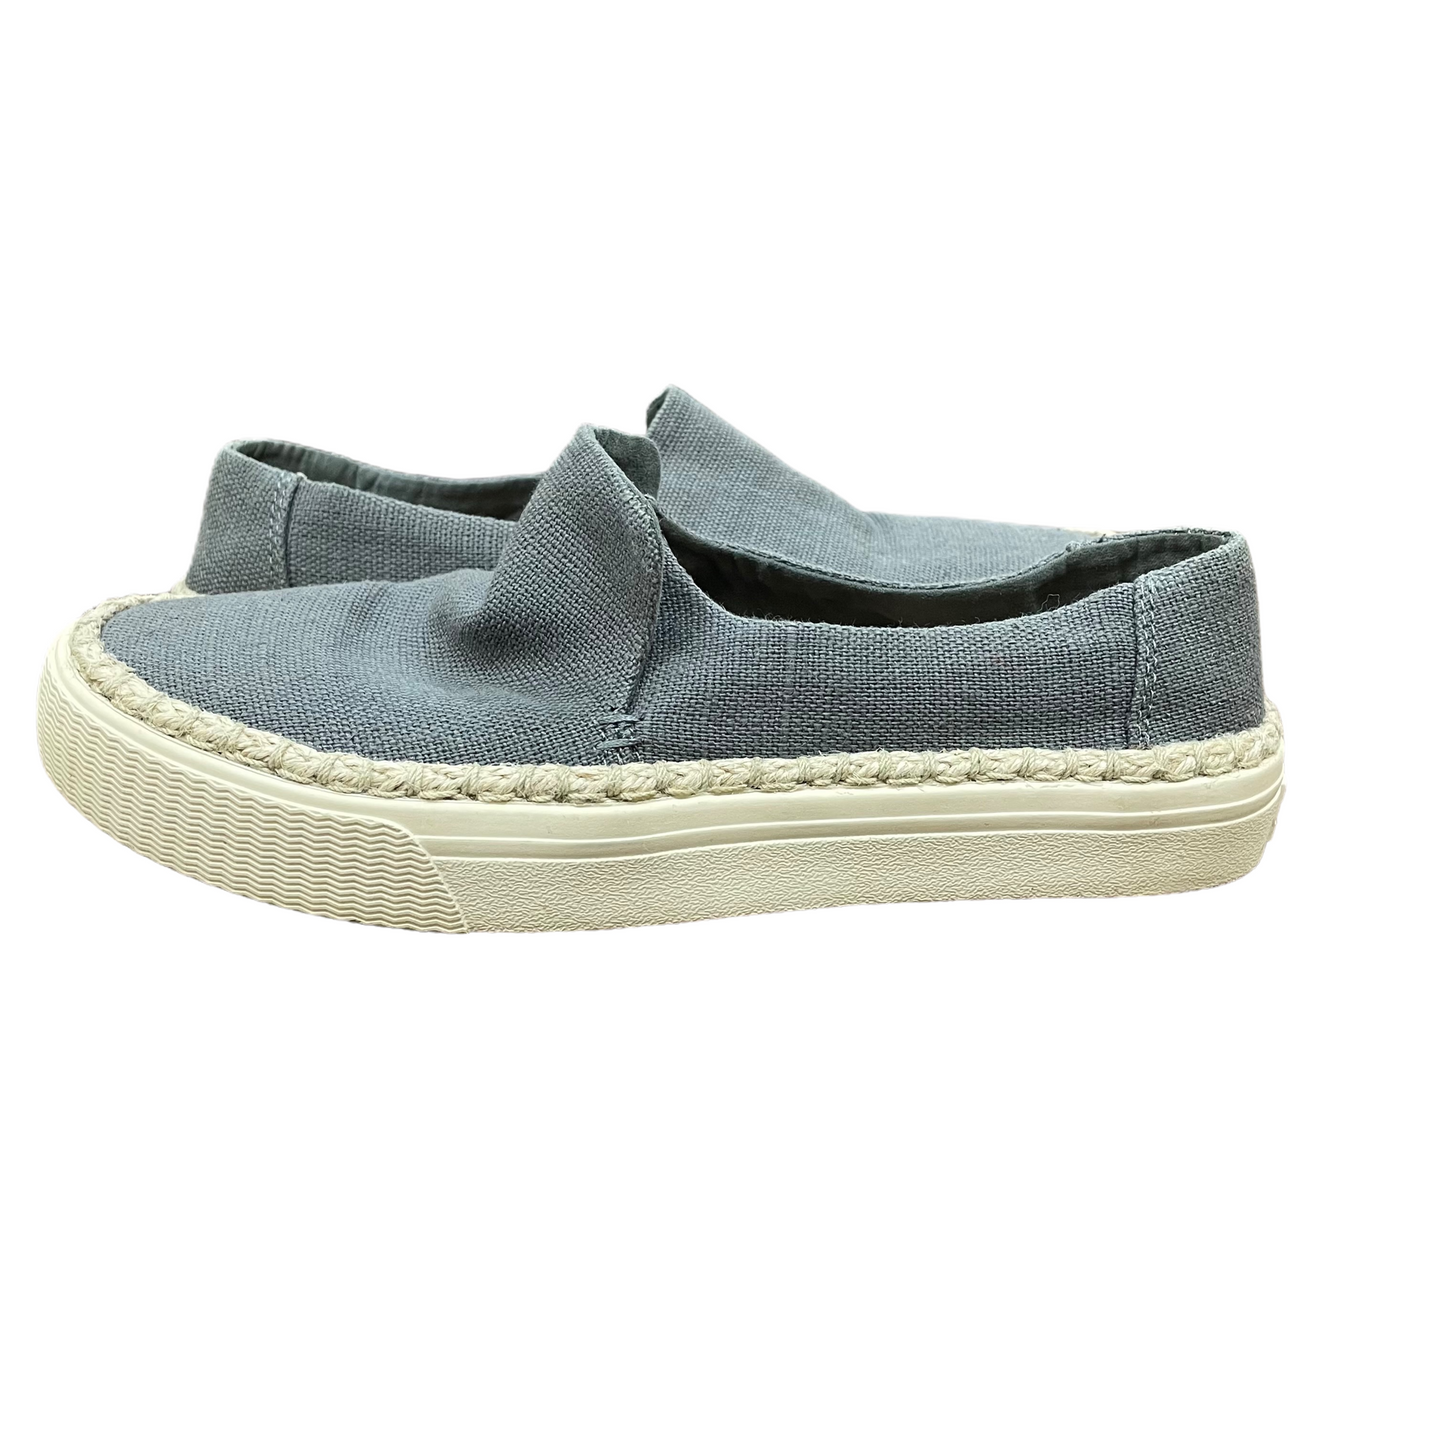 Grey Shoes Flats By Toms, Size: 7